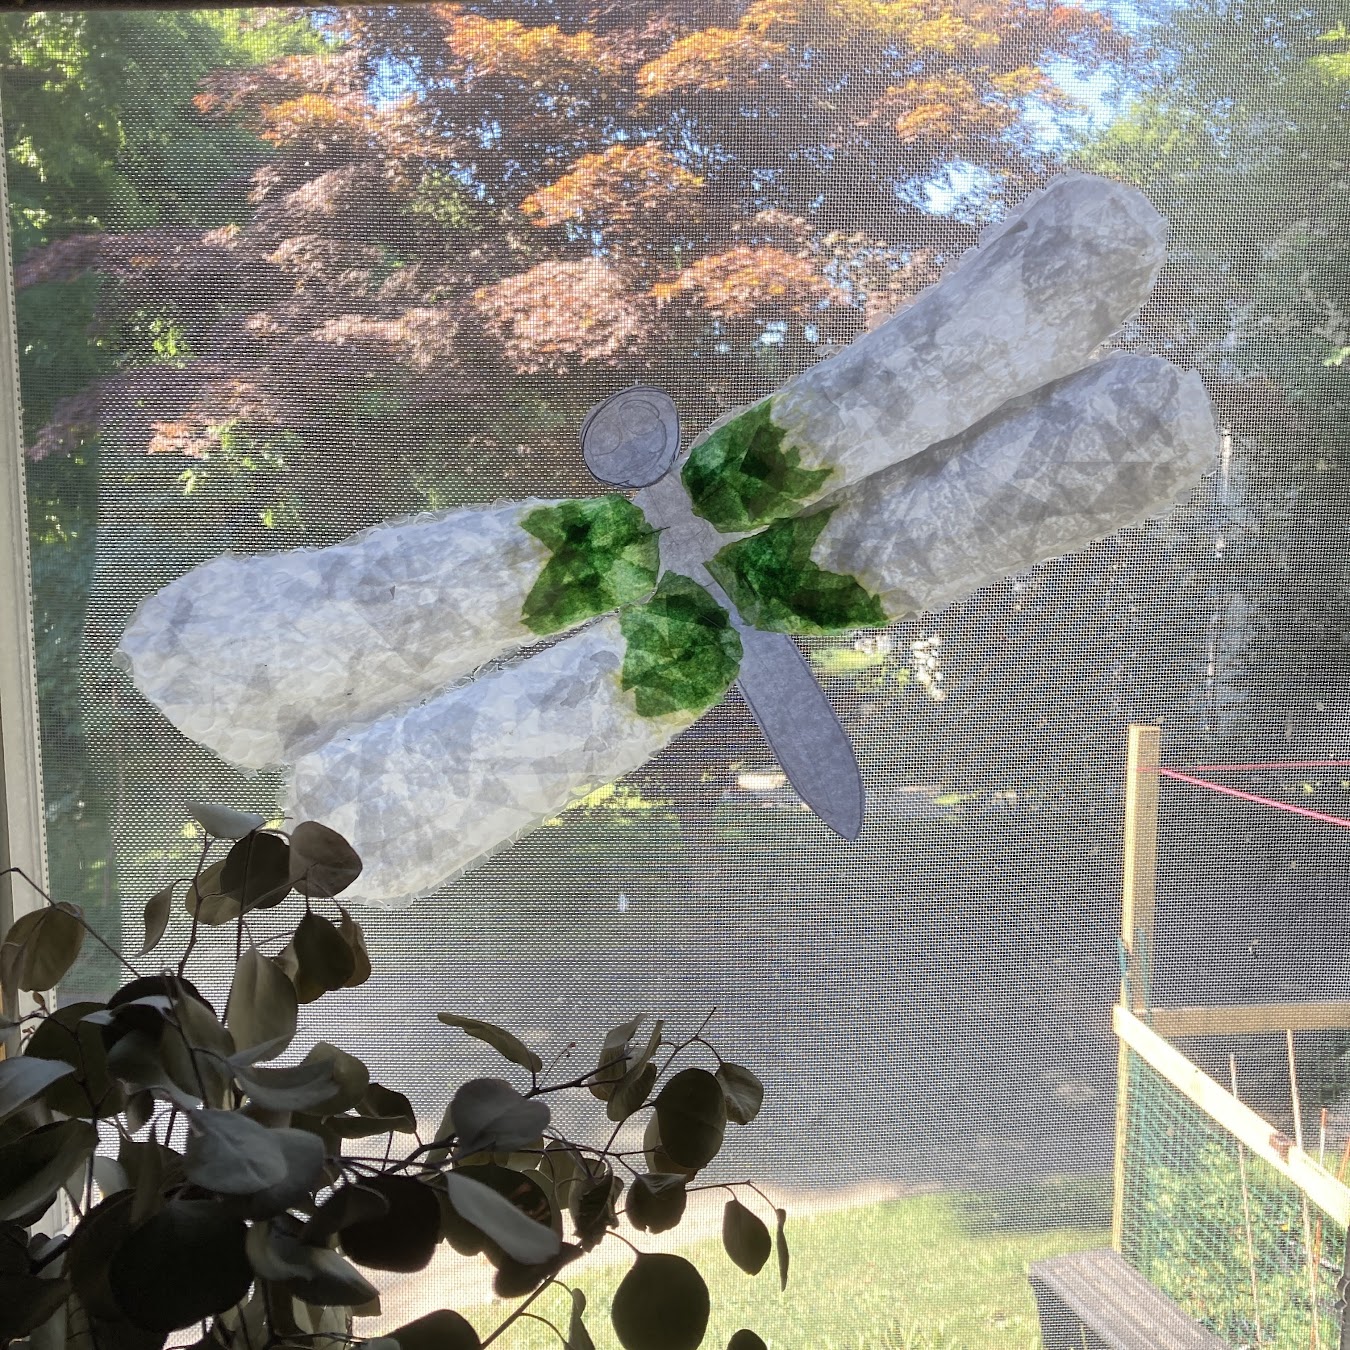 Completed stained glass dragonfly hanging in a window with a eucalyptus plant in the foreground.